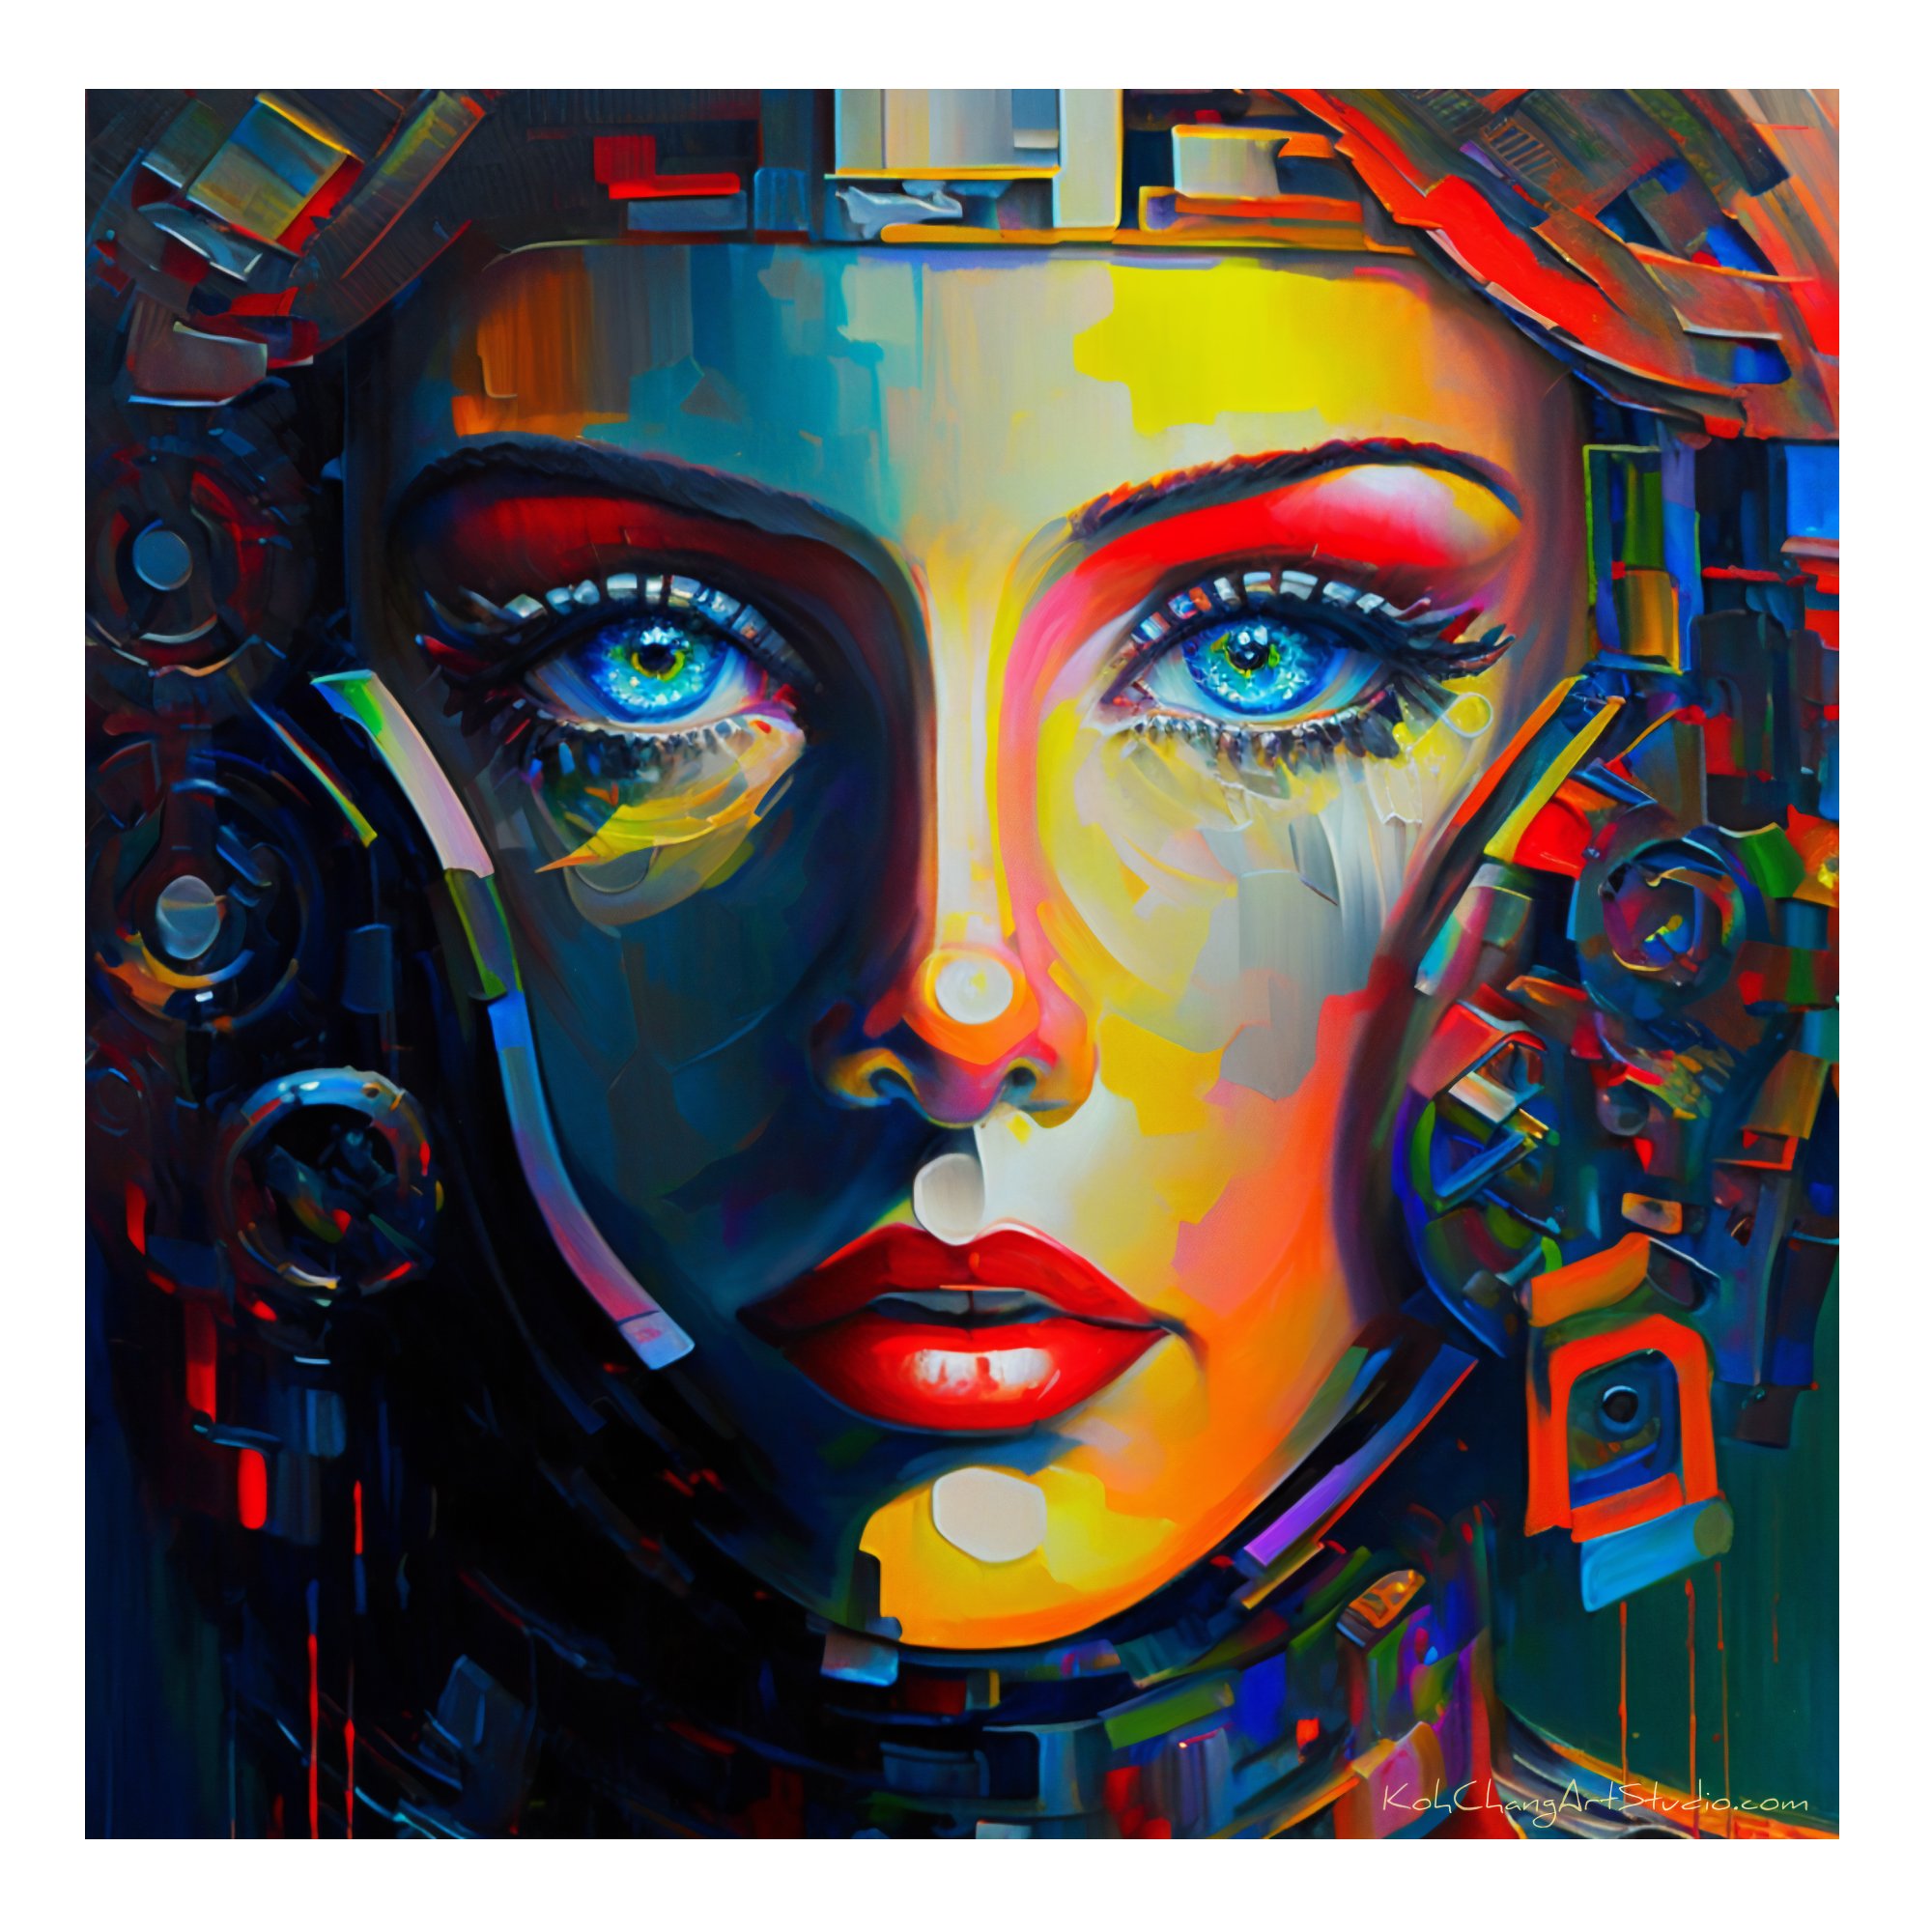 SELF 236 Artistic Portrait - Deep blue-green eyes echoing epochs, a blend of future and past.